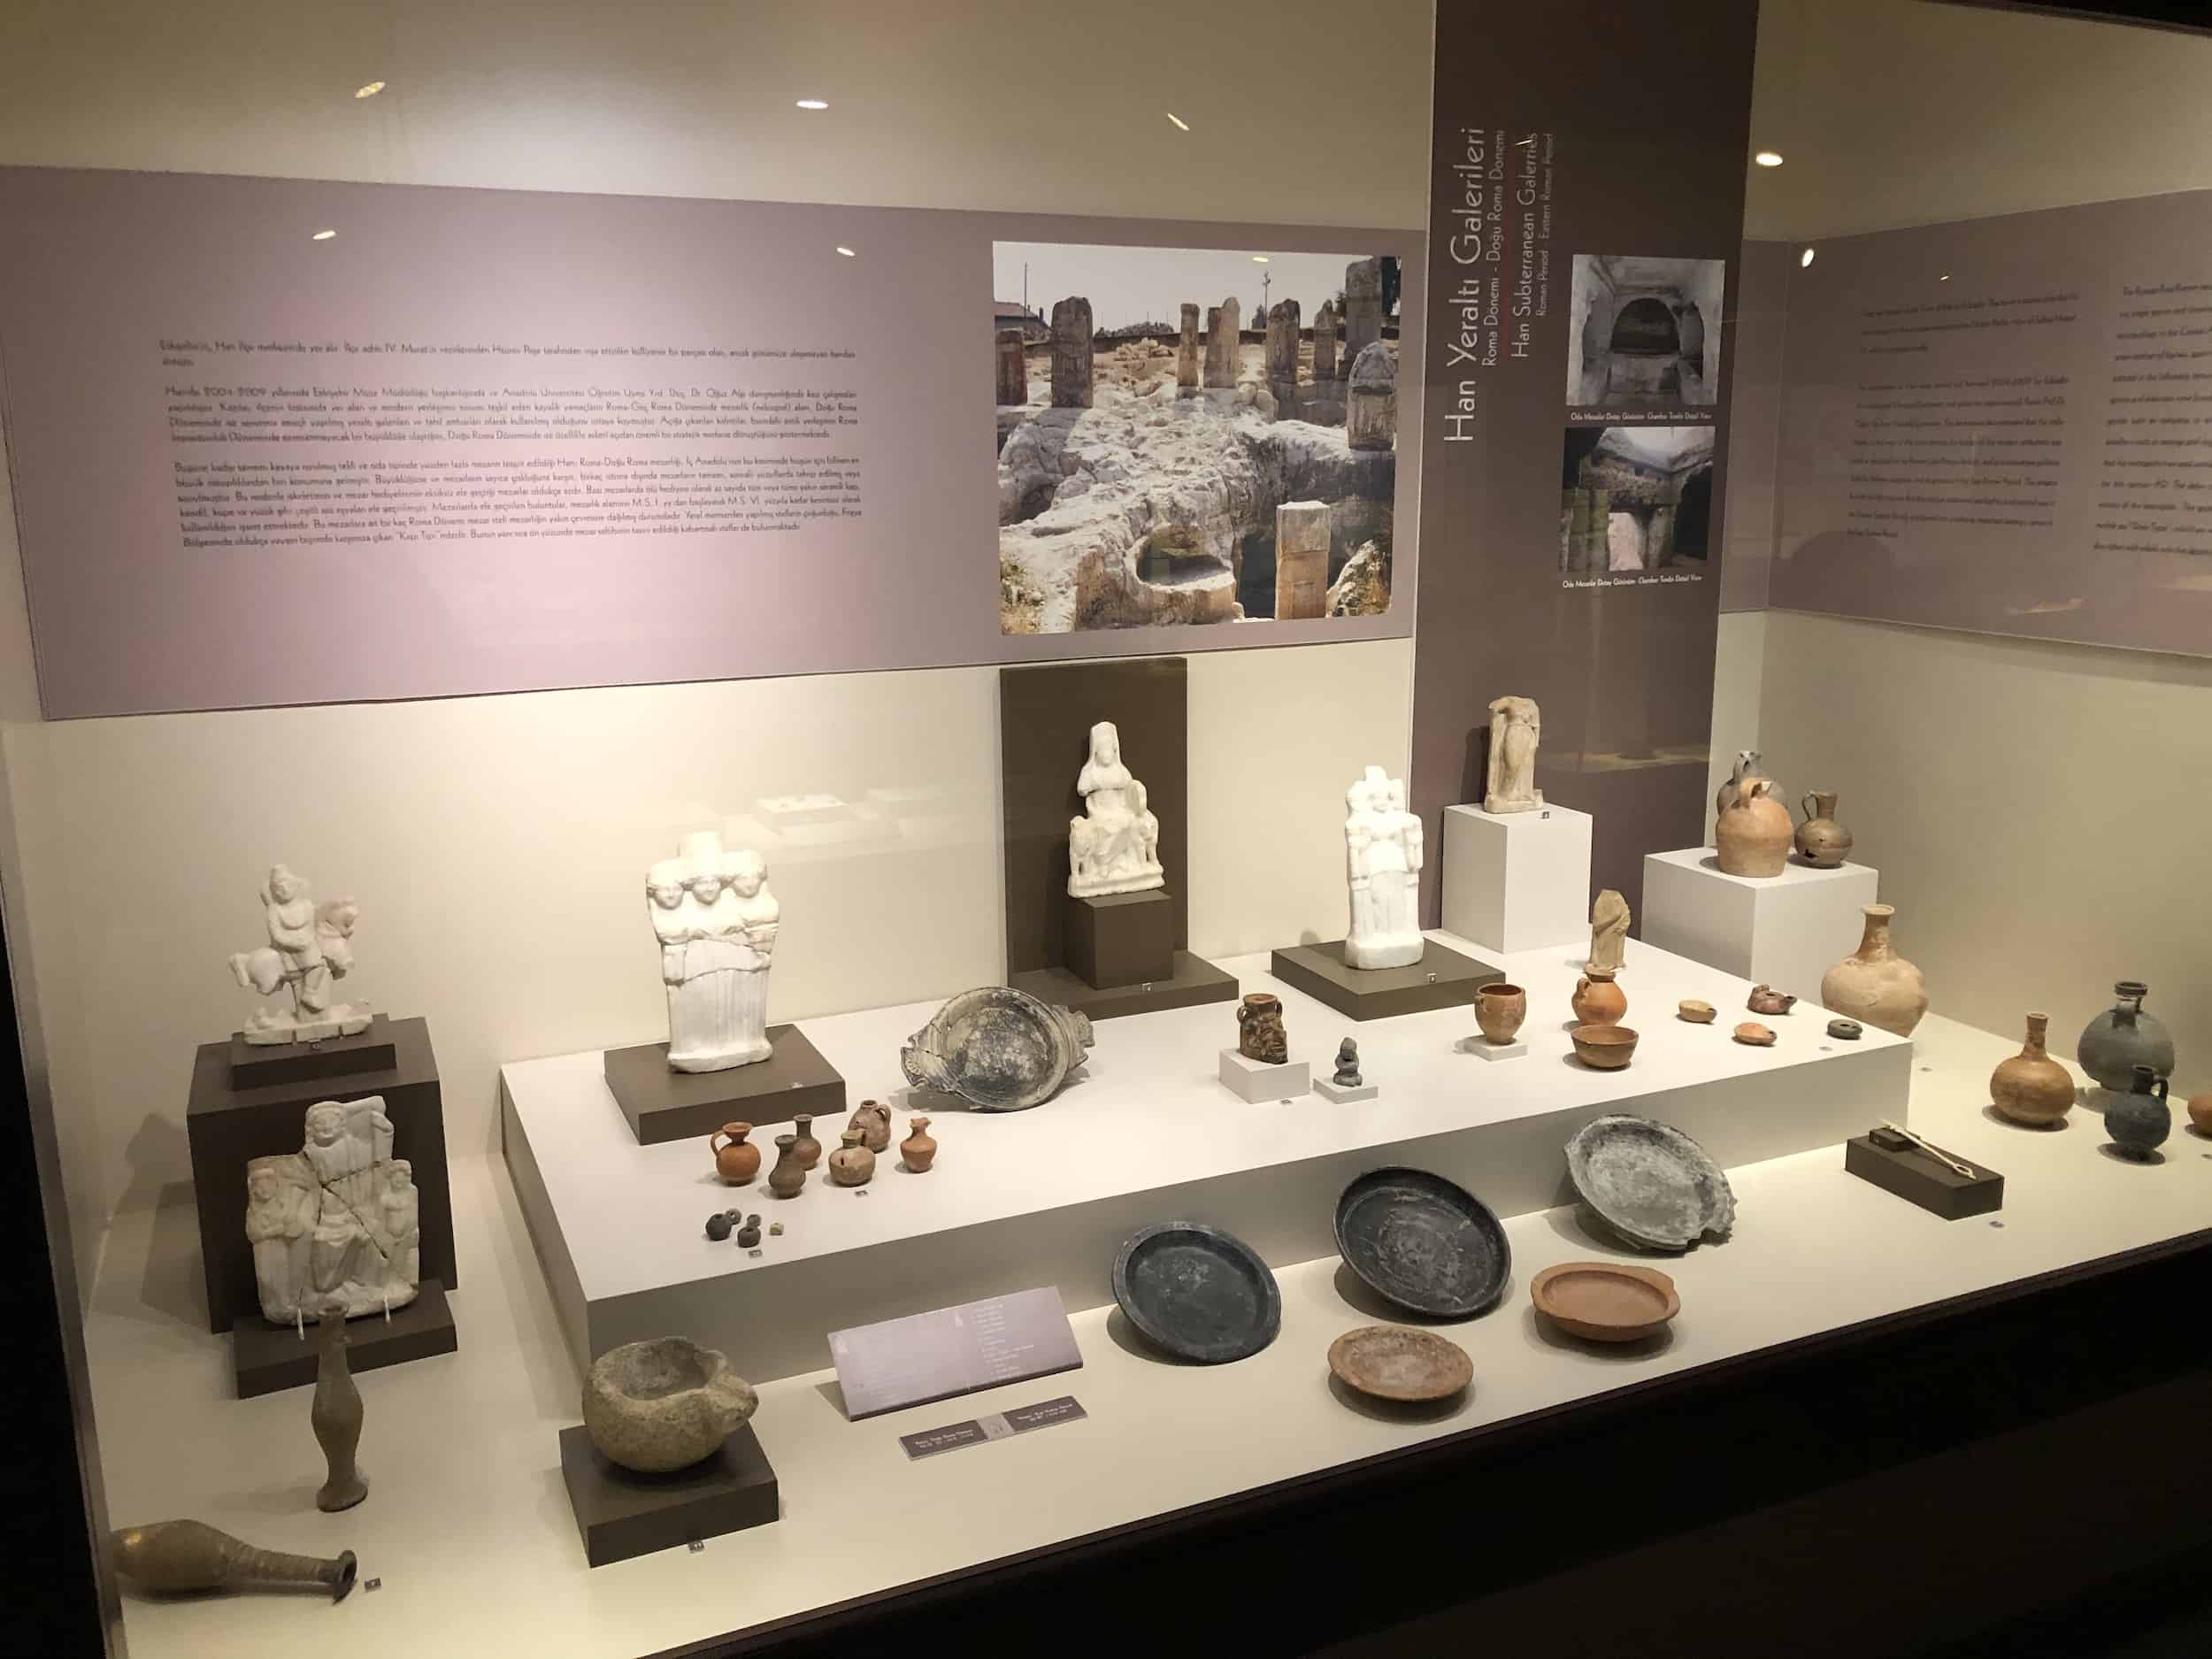 Roman period finds from the Han Underground City